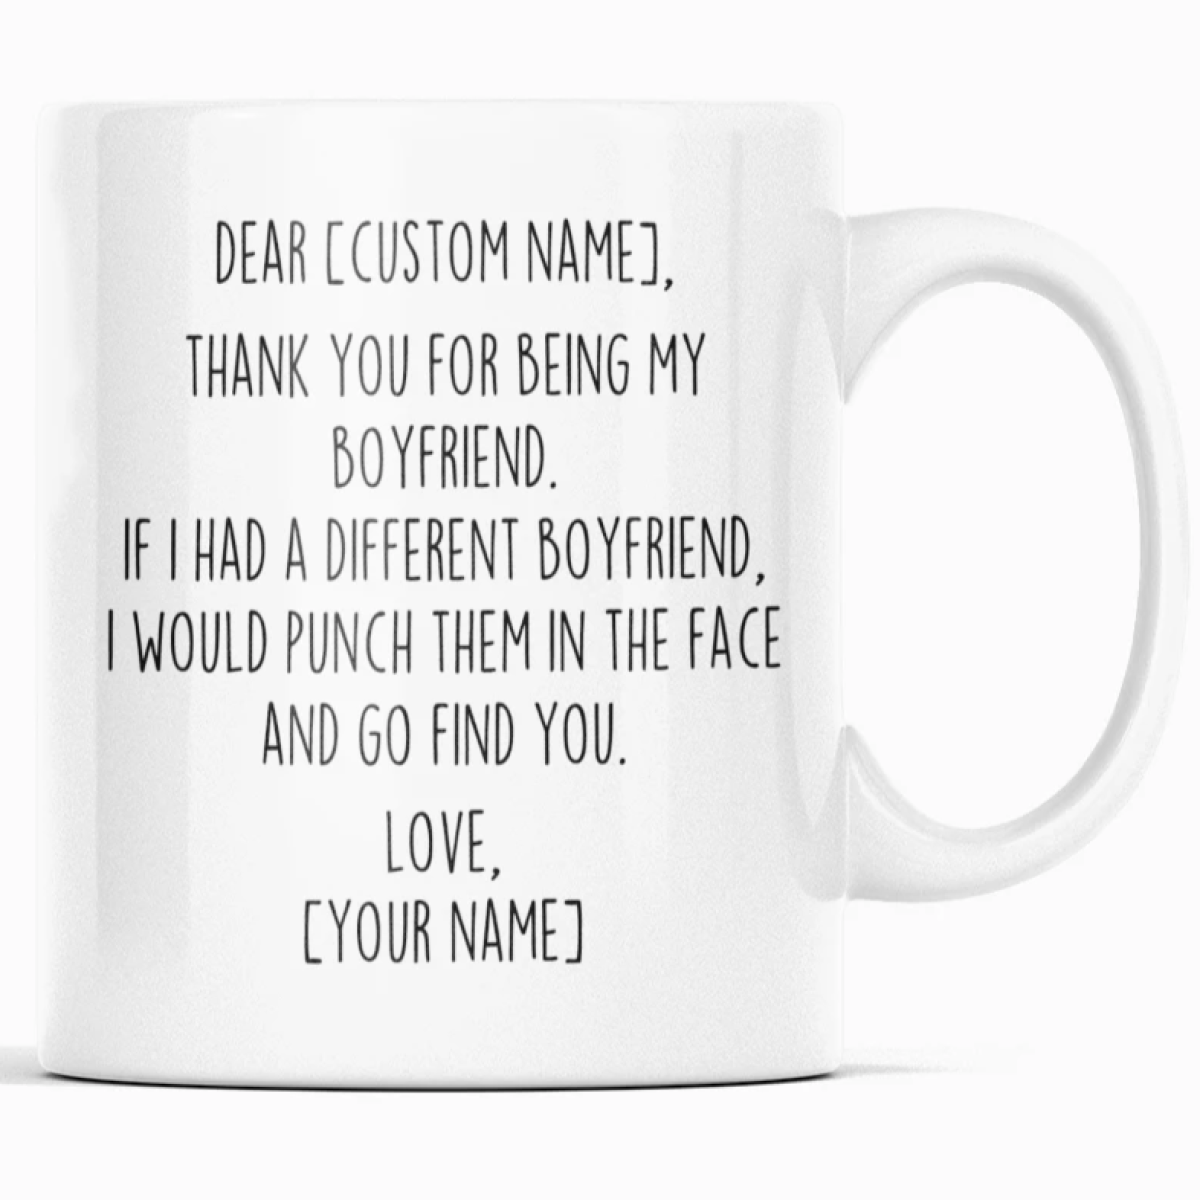 45 DIY Christmas Gifts for Your Boyfriend that He'll Cherish Forever